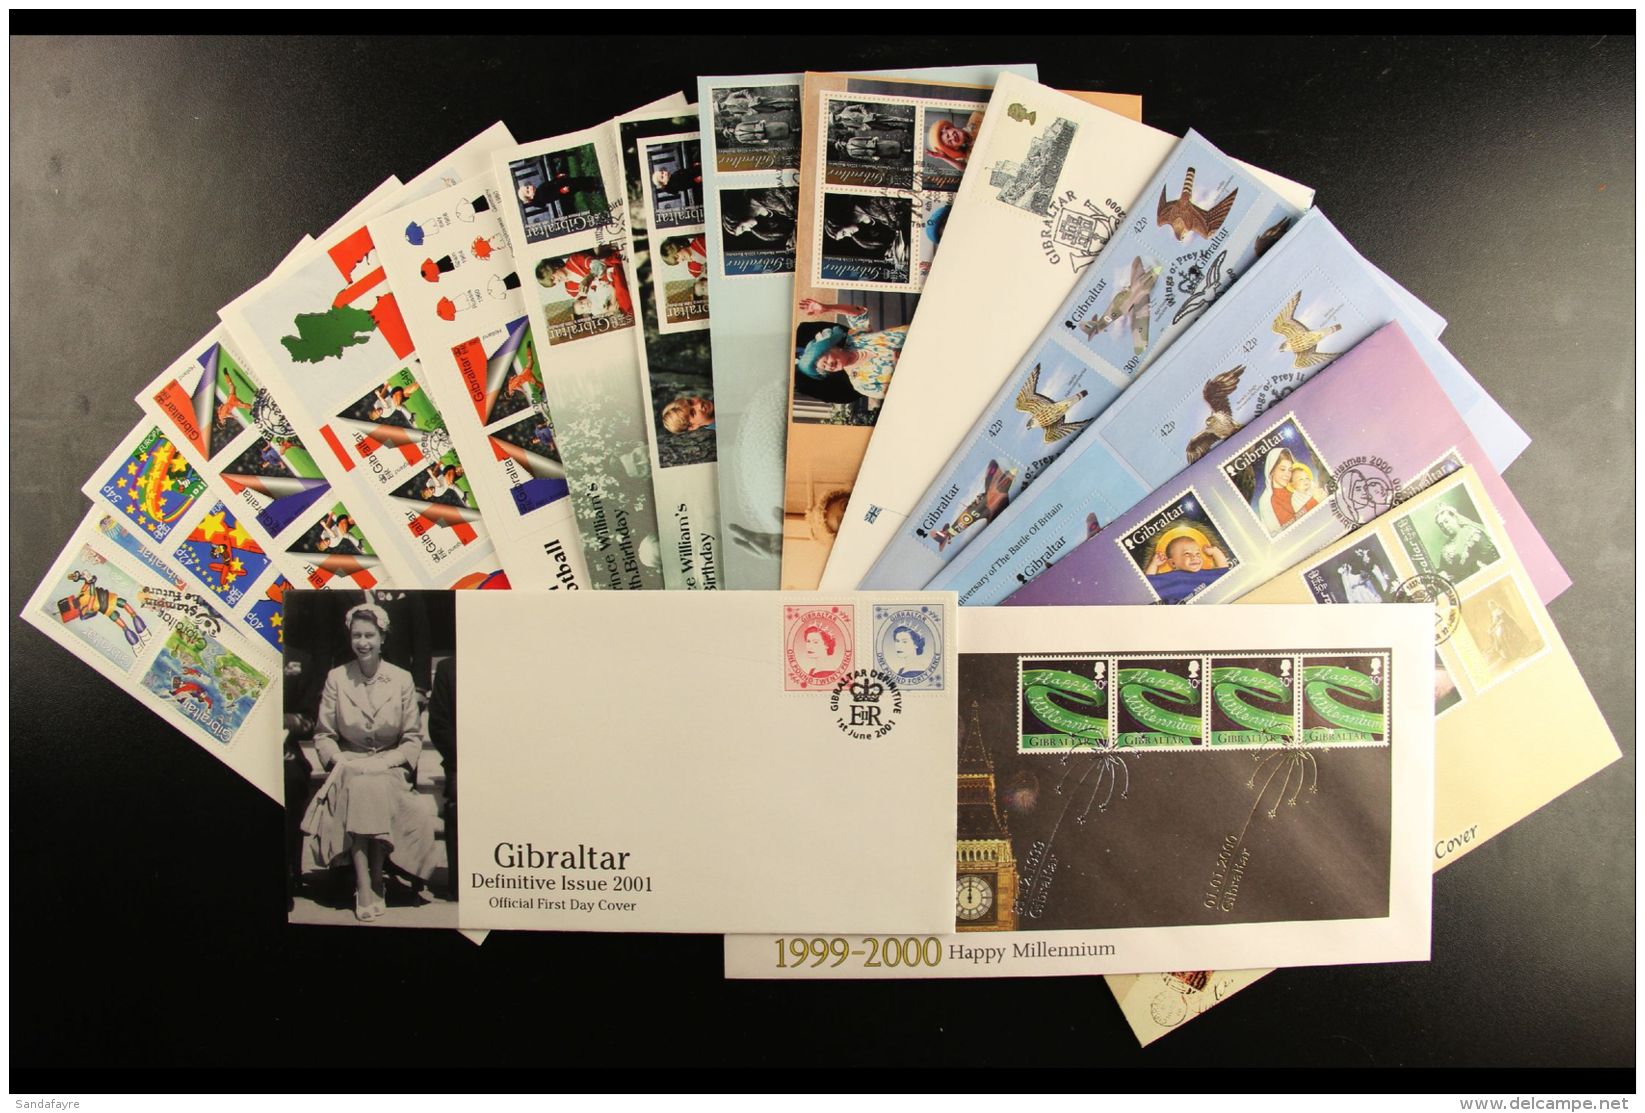 2000-2010 FIRST DAY COVER COLLECTION Presented Chronologically In A Small Box. An ALL DIFFERENT, Highly Complete... - Gibraltar